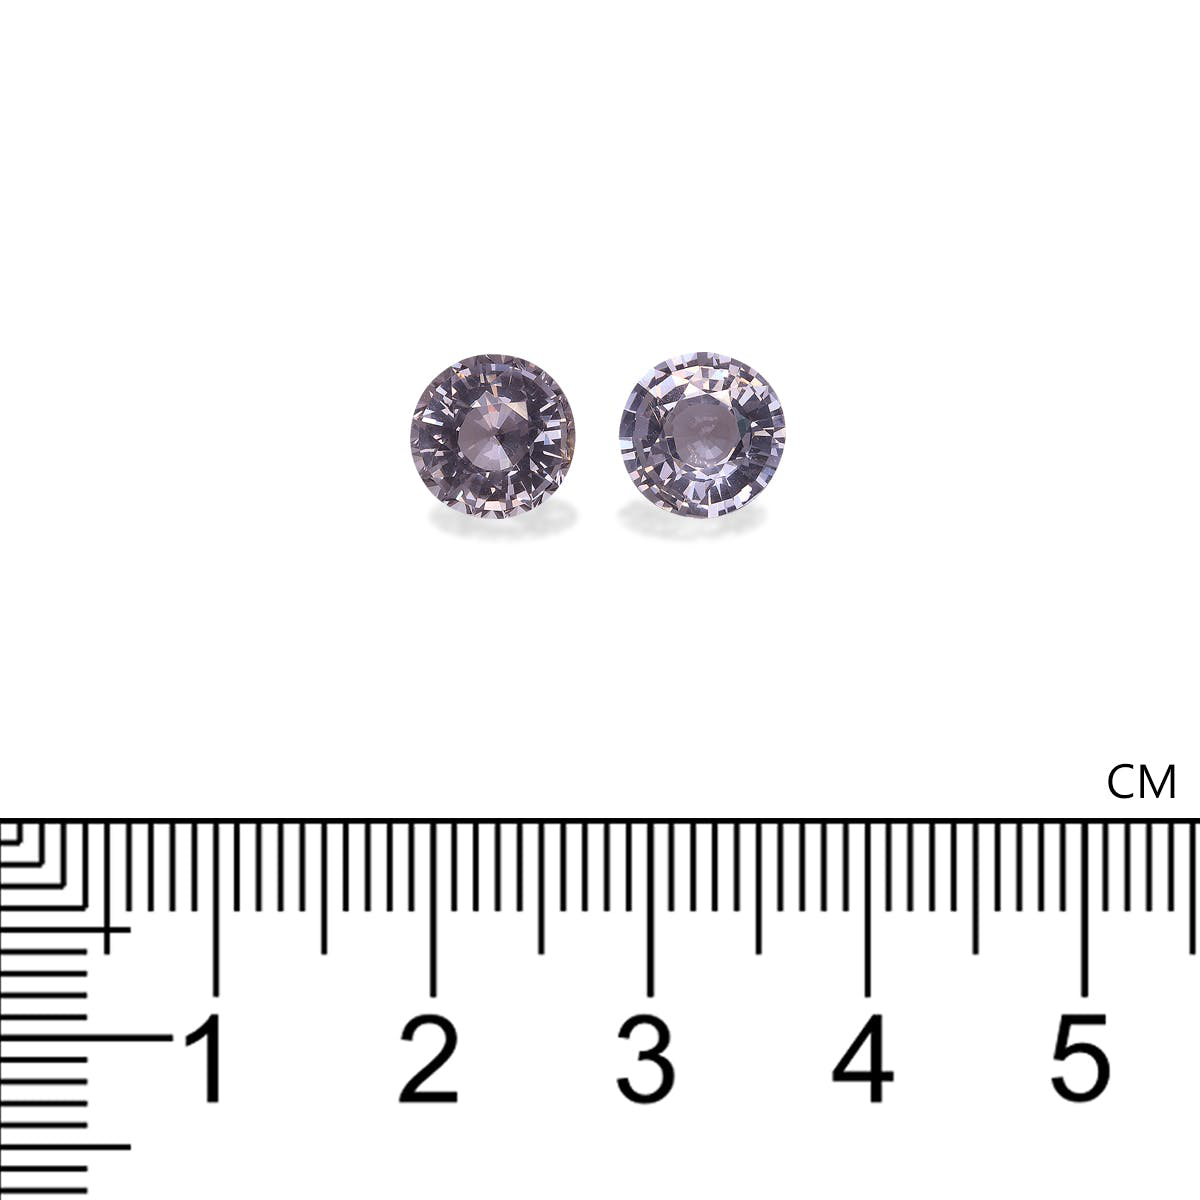 Picture of Silver Grey Spinel 3.82ct - 7mm (SP0380)